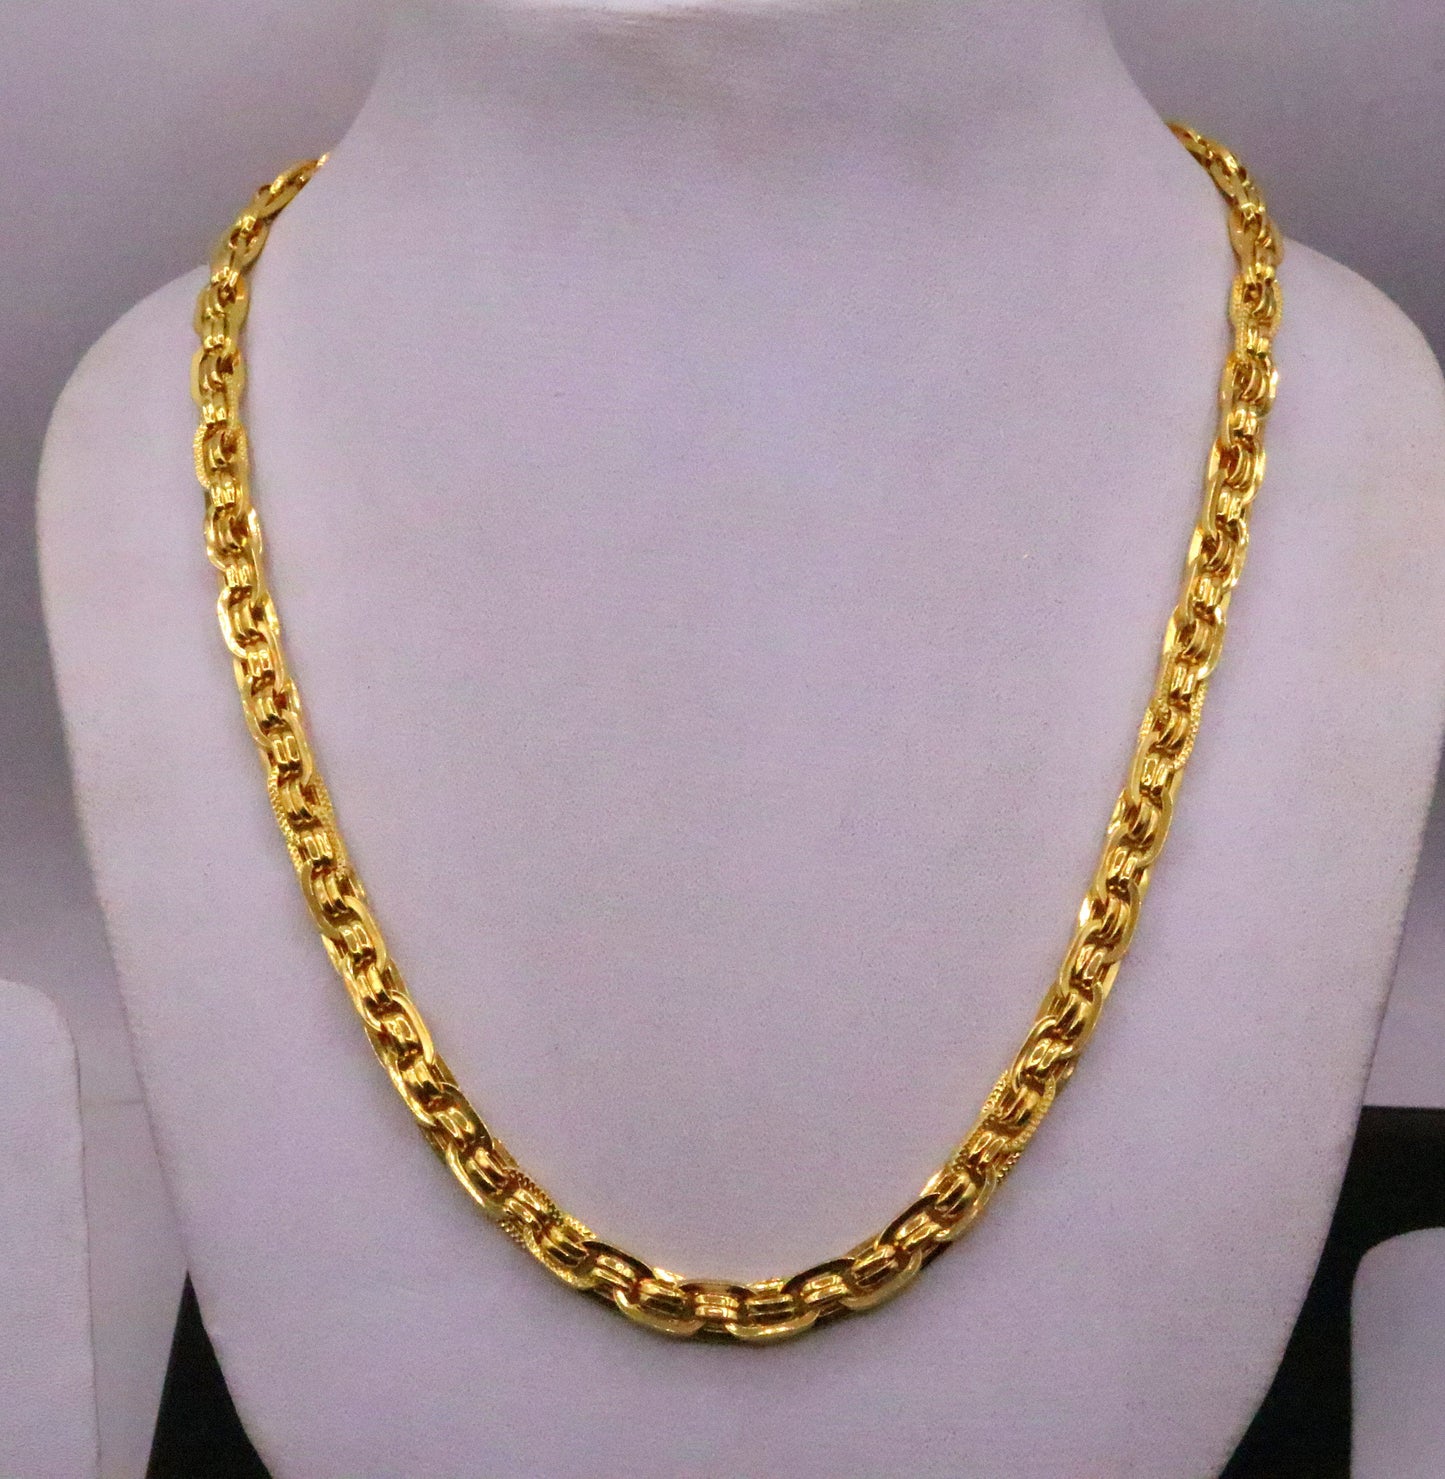 22karat yellow gold fabulous handmade designer chain necklace link chain stylish unisex jewelry from india ch215 - TRIBAL ORNAMENTS